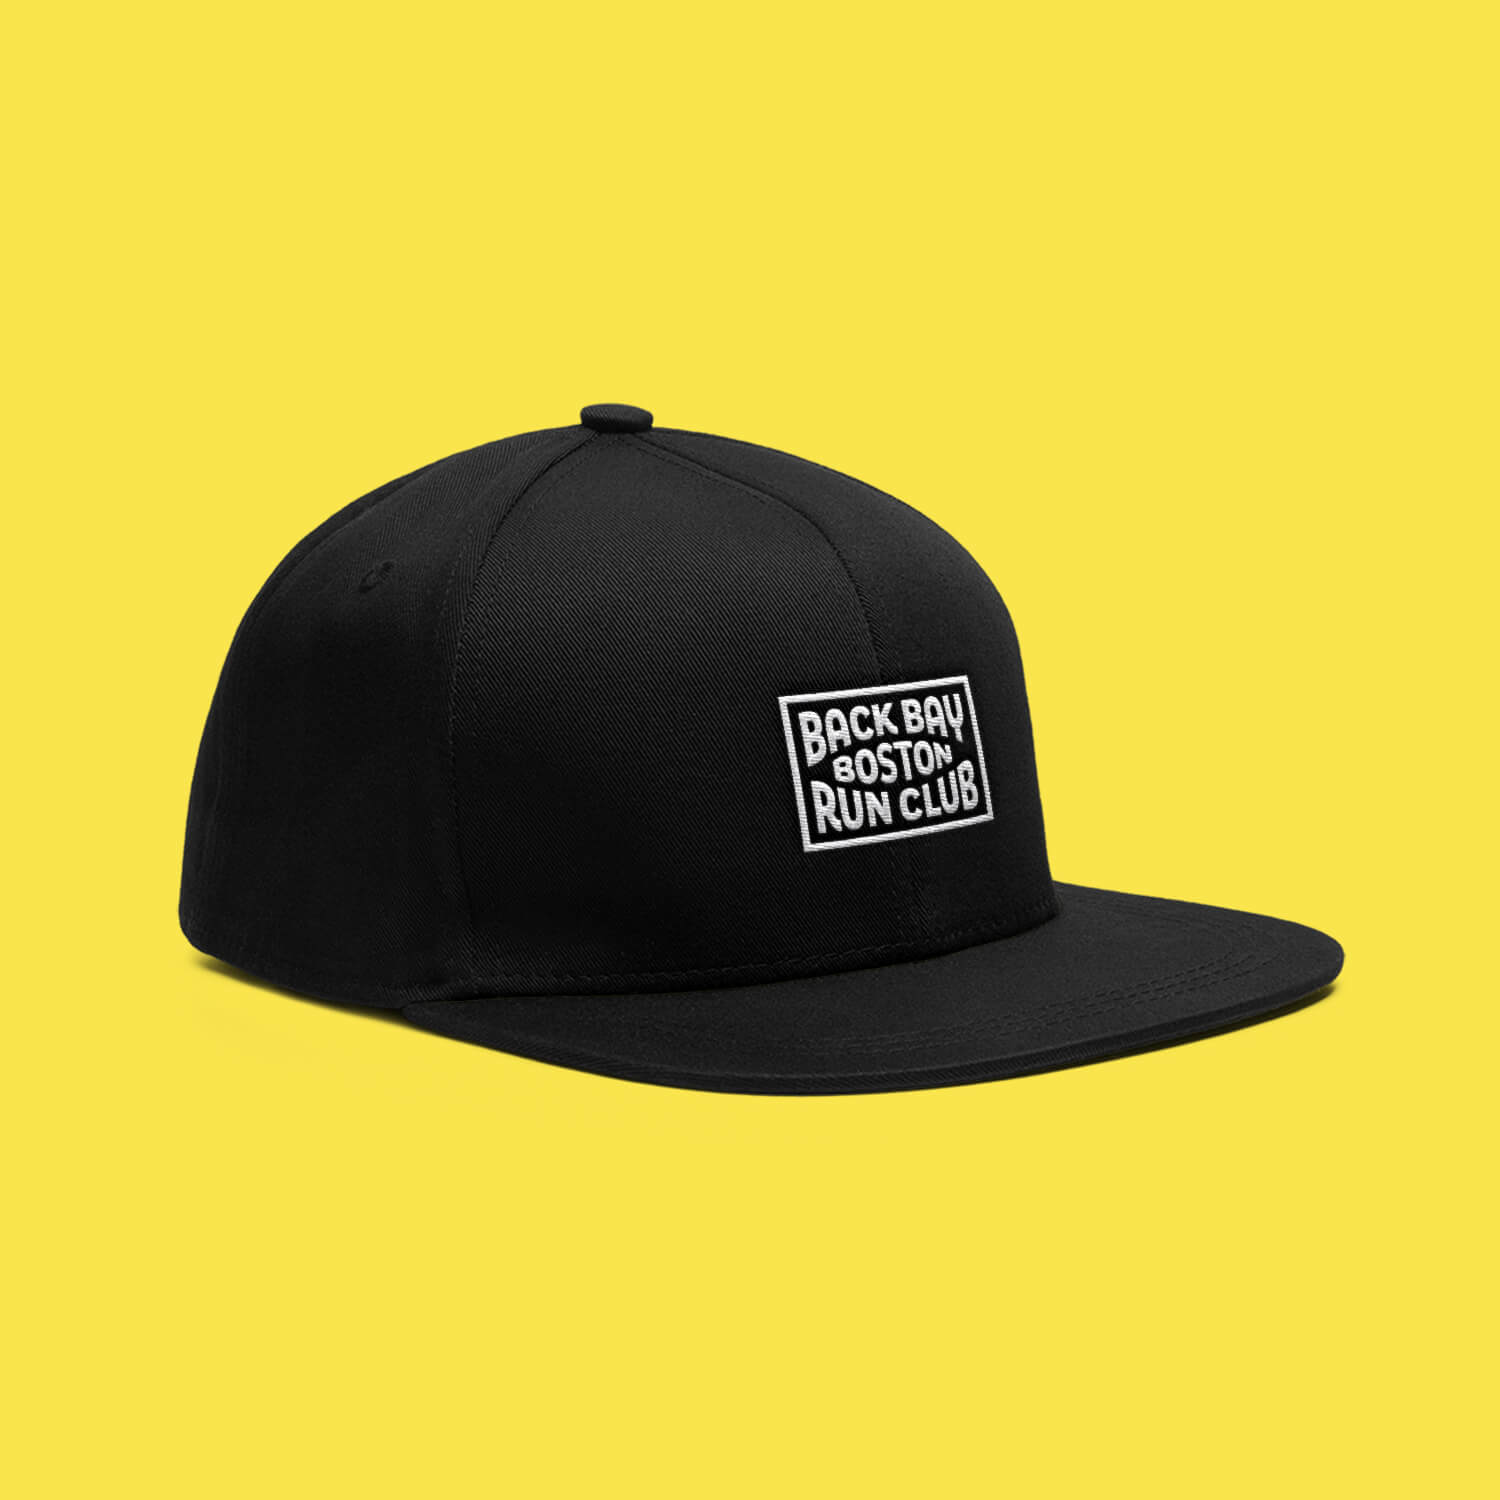 Black Back Bay Run Club snapback hat featuring a white patch